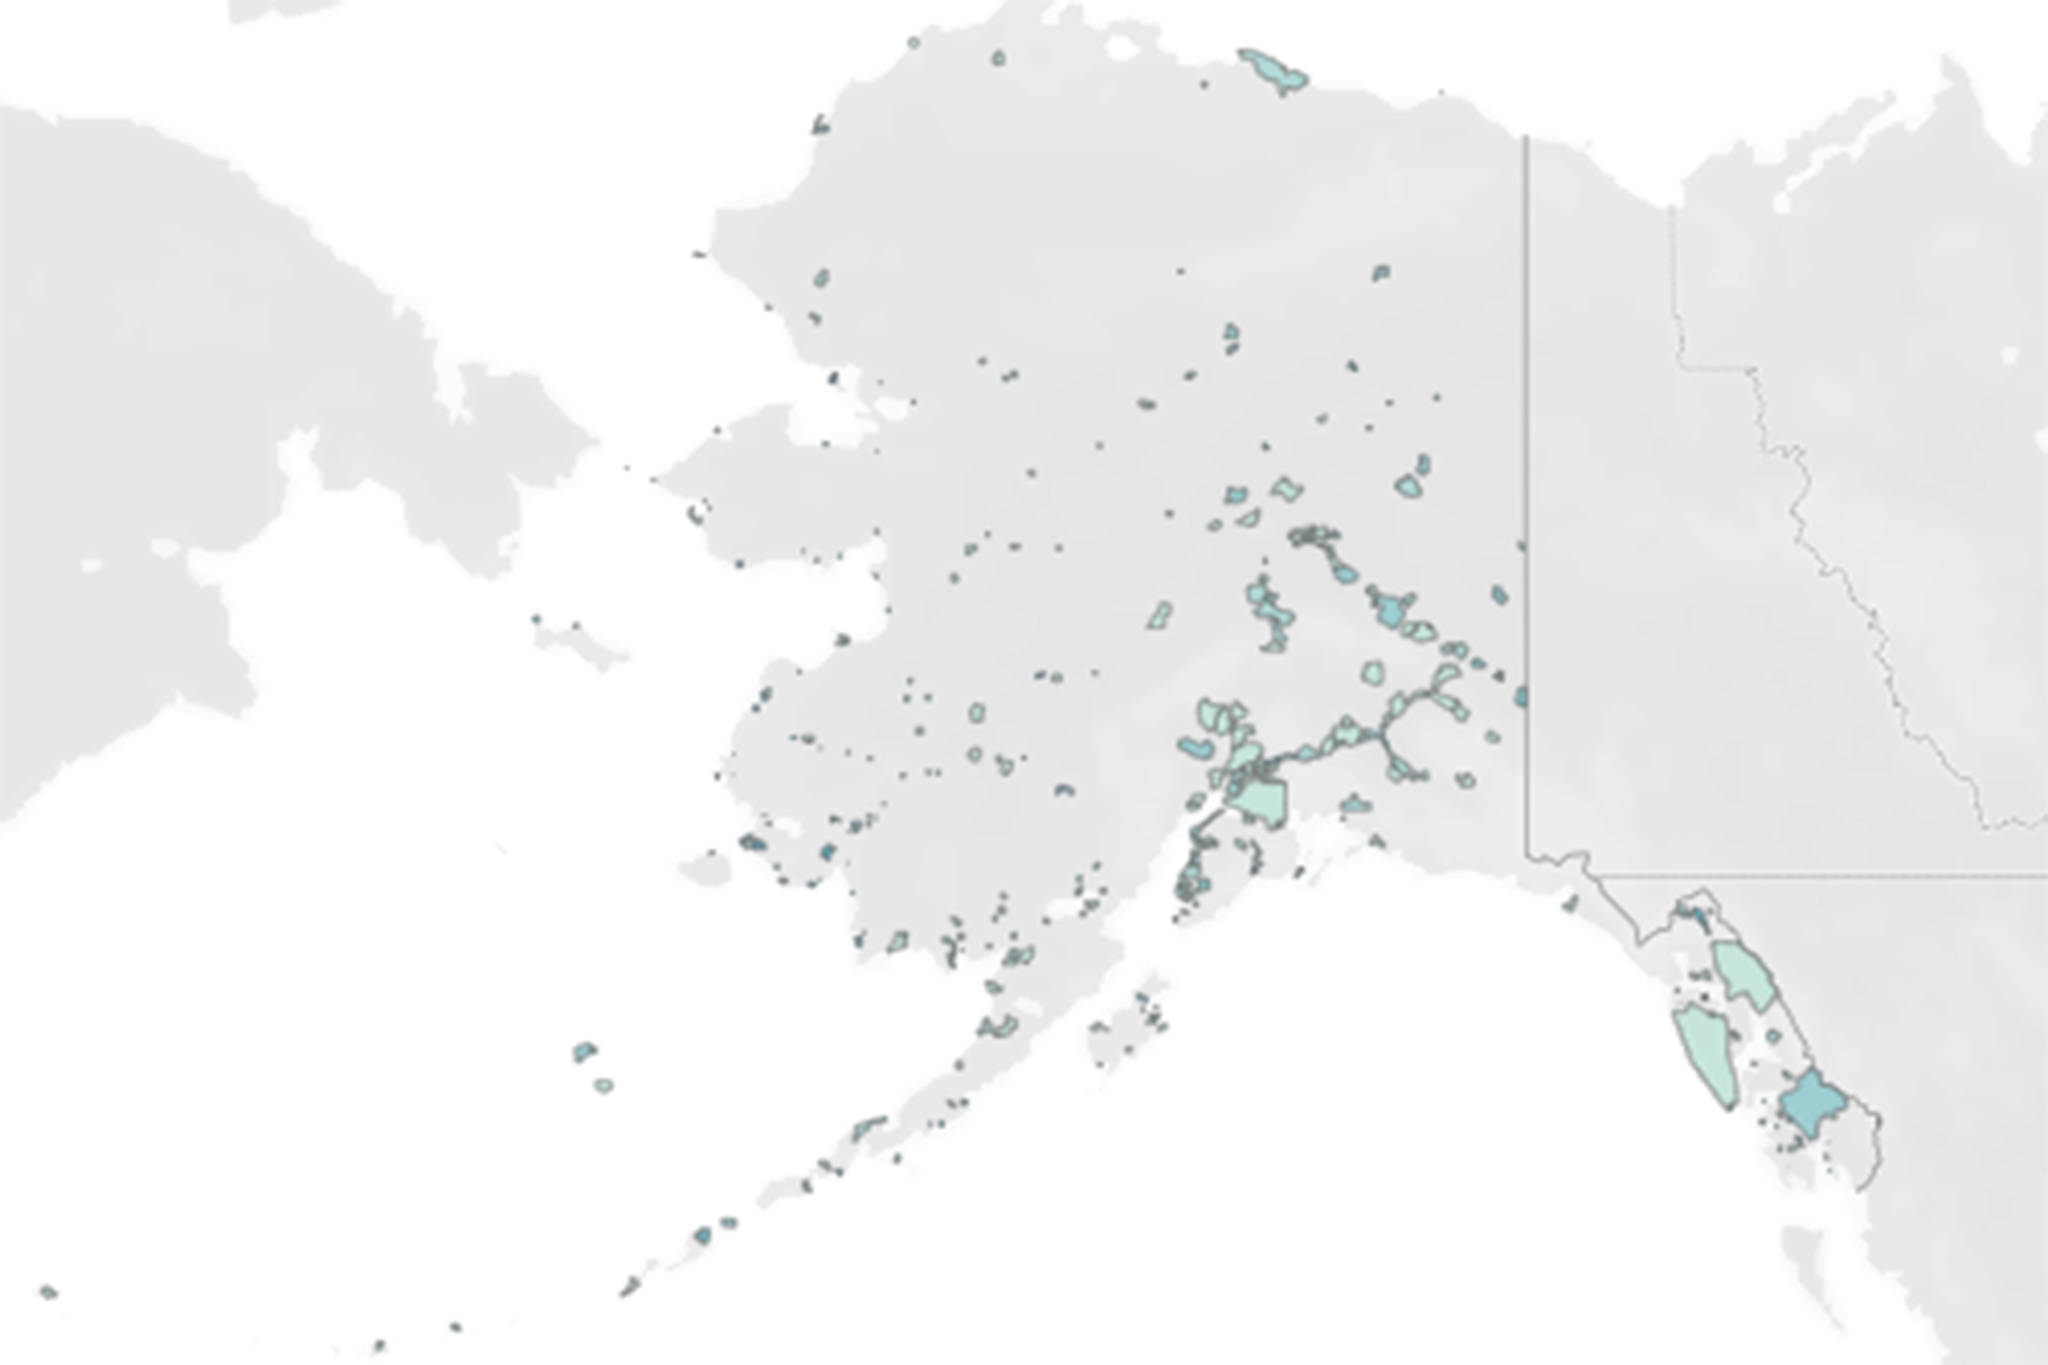 This screenshot from a project by University of Alaska Southeast postdoctoral researcher John Harley shows Alaska’s cities and census-designated places. Darker-colored areas on the map are communities with higher social vulnerability indices. (Screenshot)